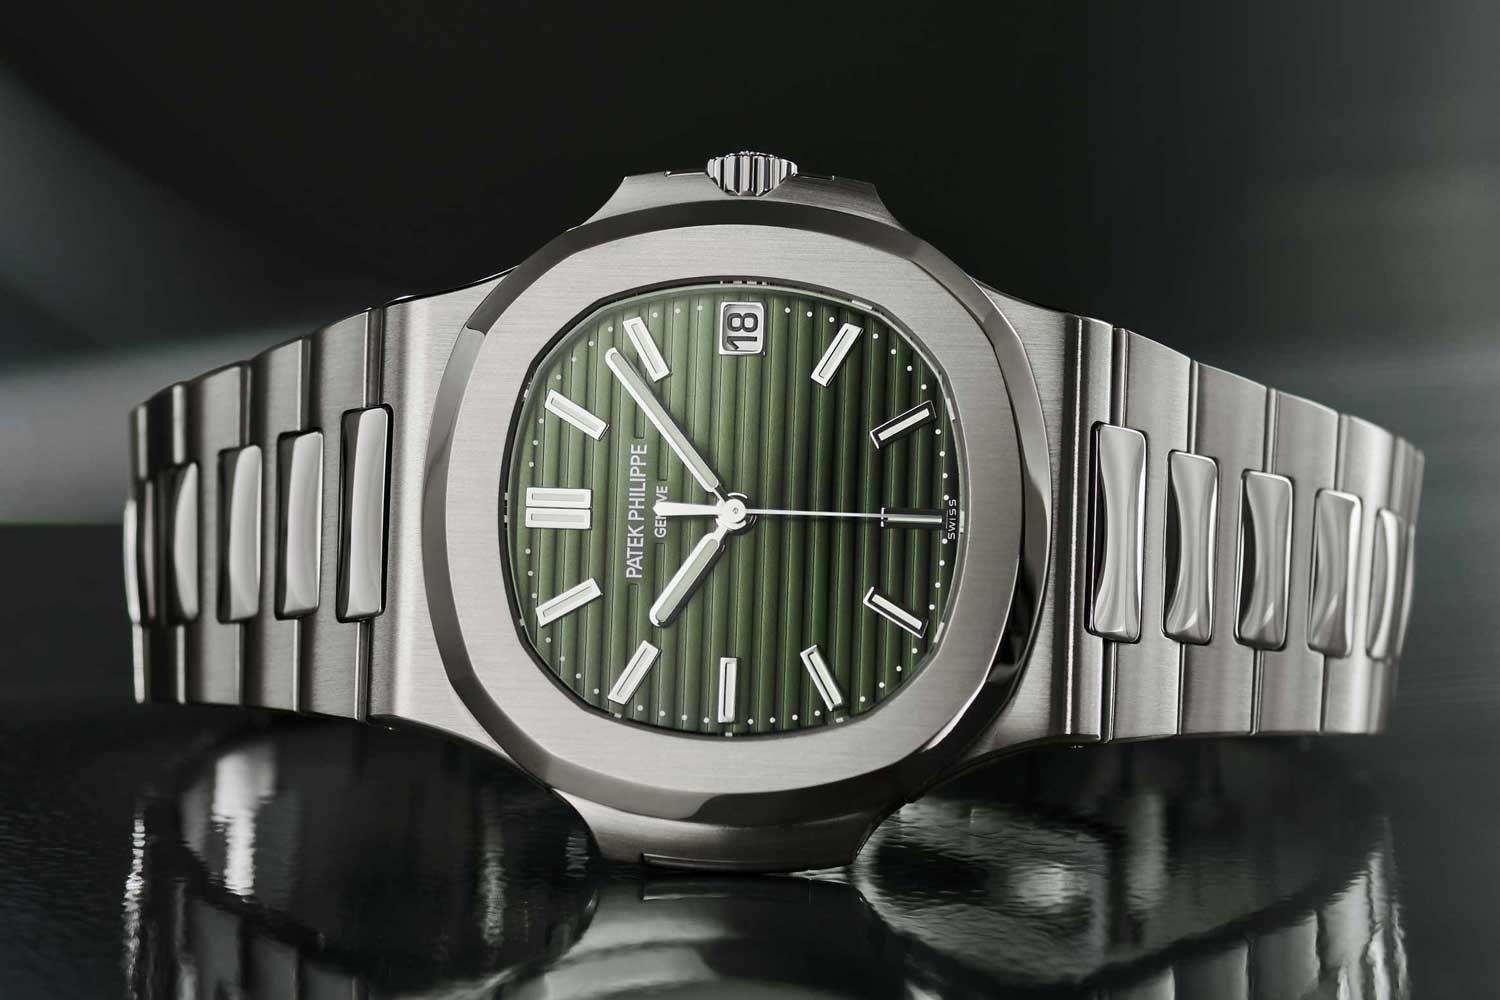 Patek Philippe ref. 5711/1A-014 introduced in April this year.